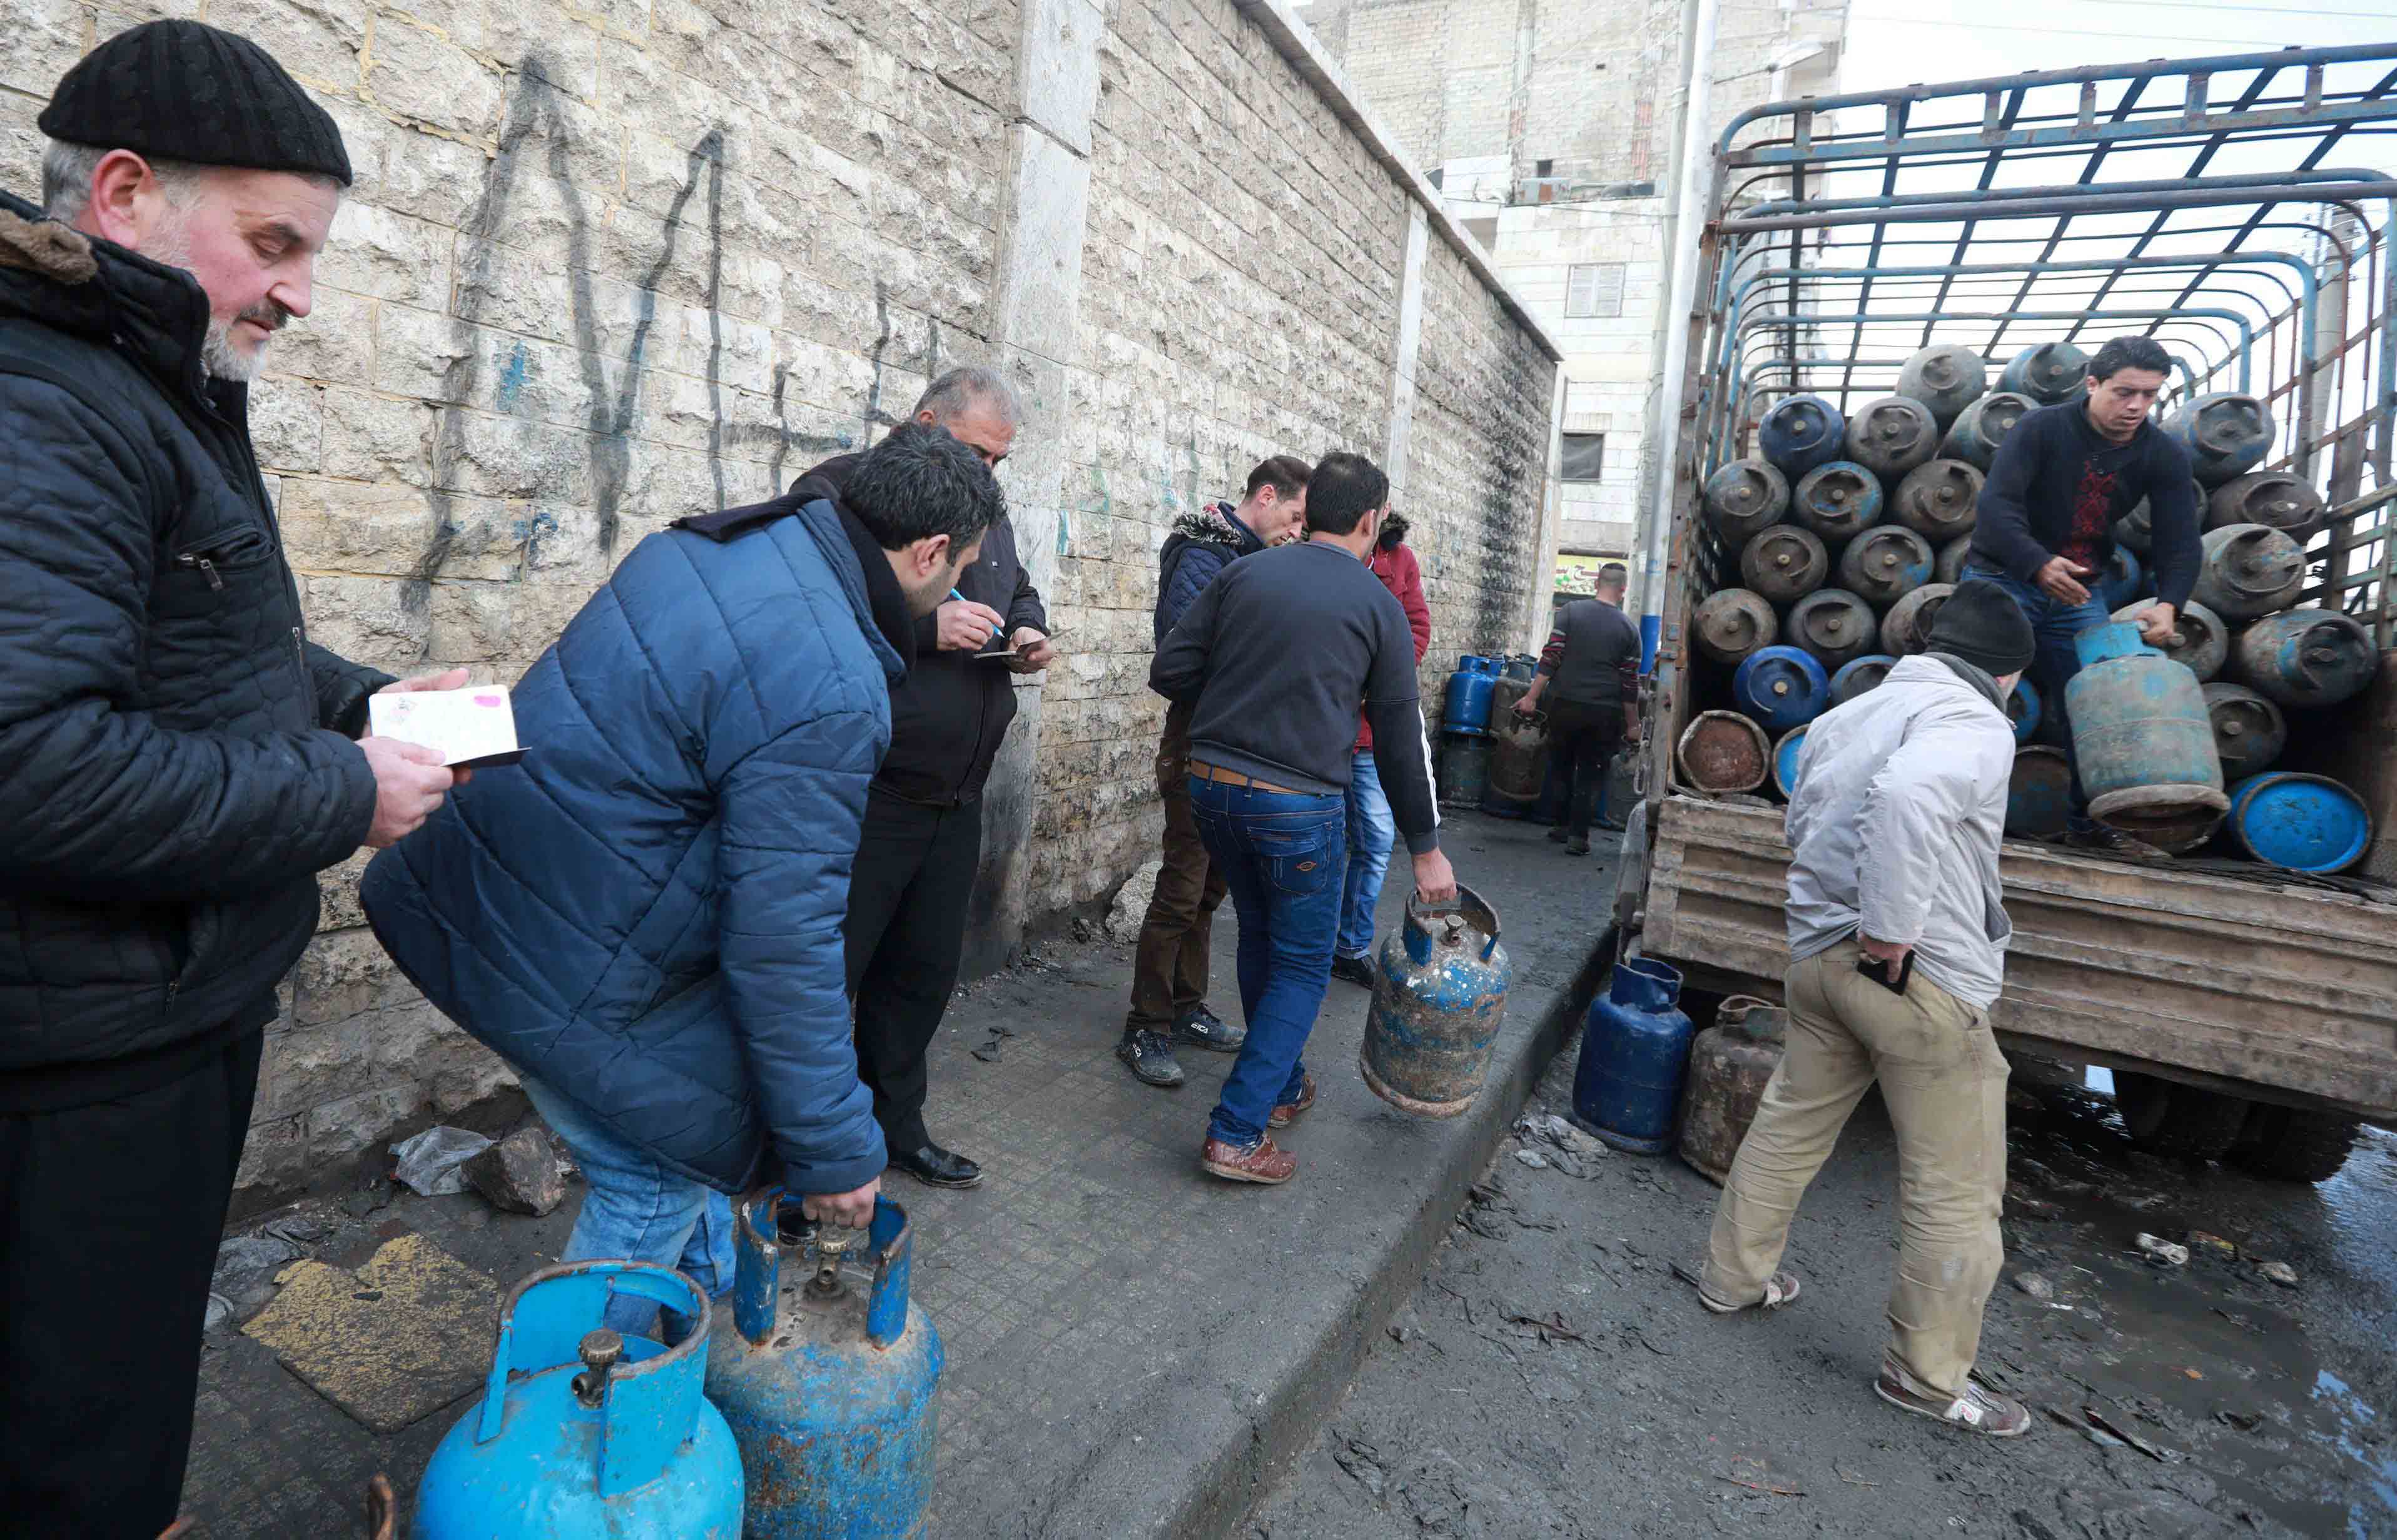 Since December, queueing for hours to buy gas has become part of everyday life in the Salah al-Din district.